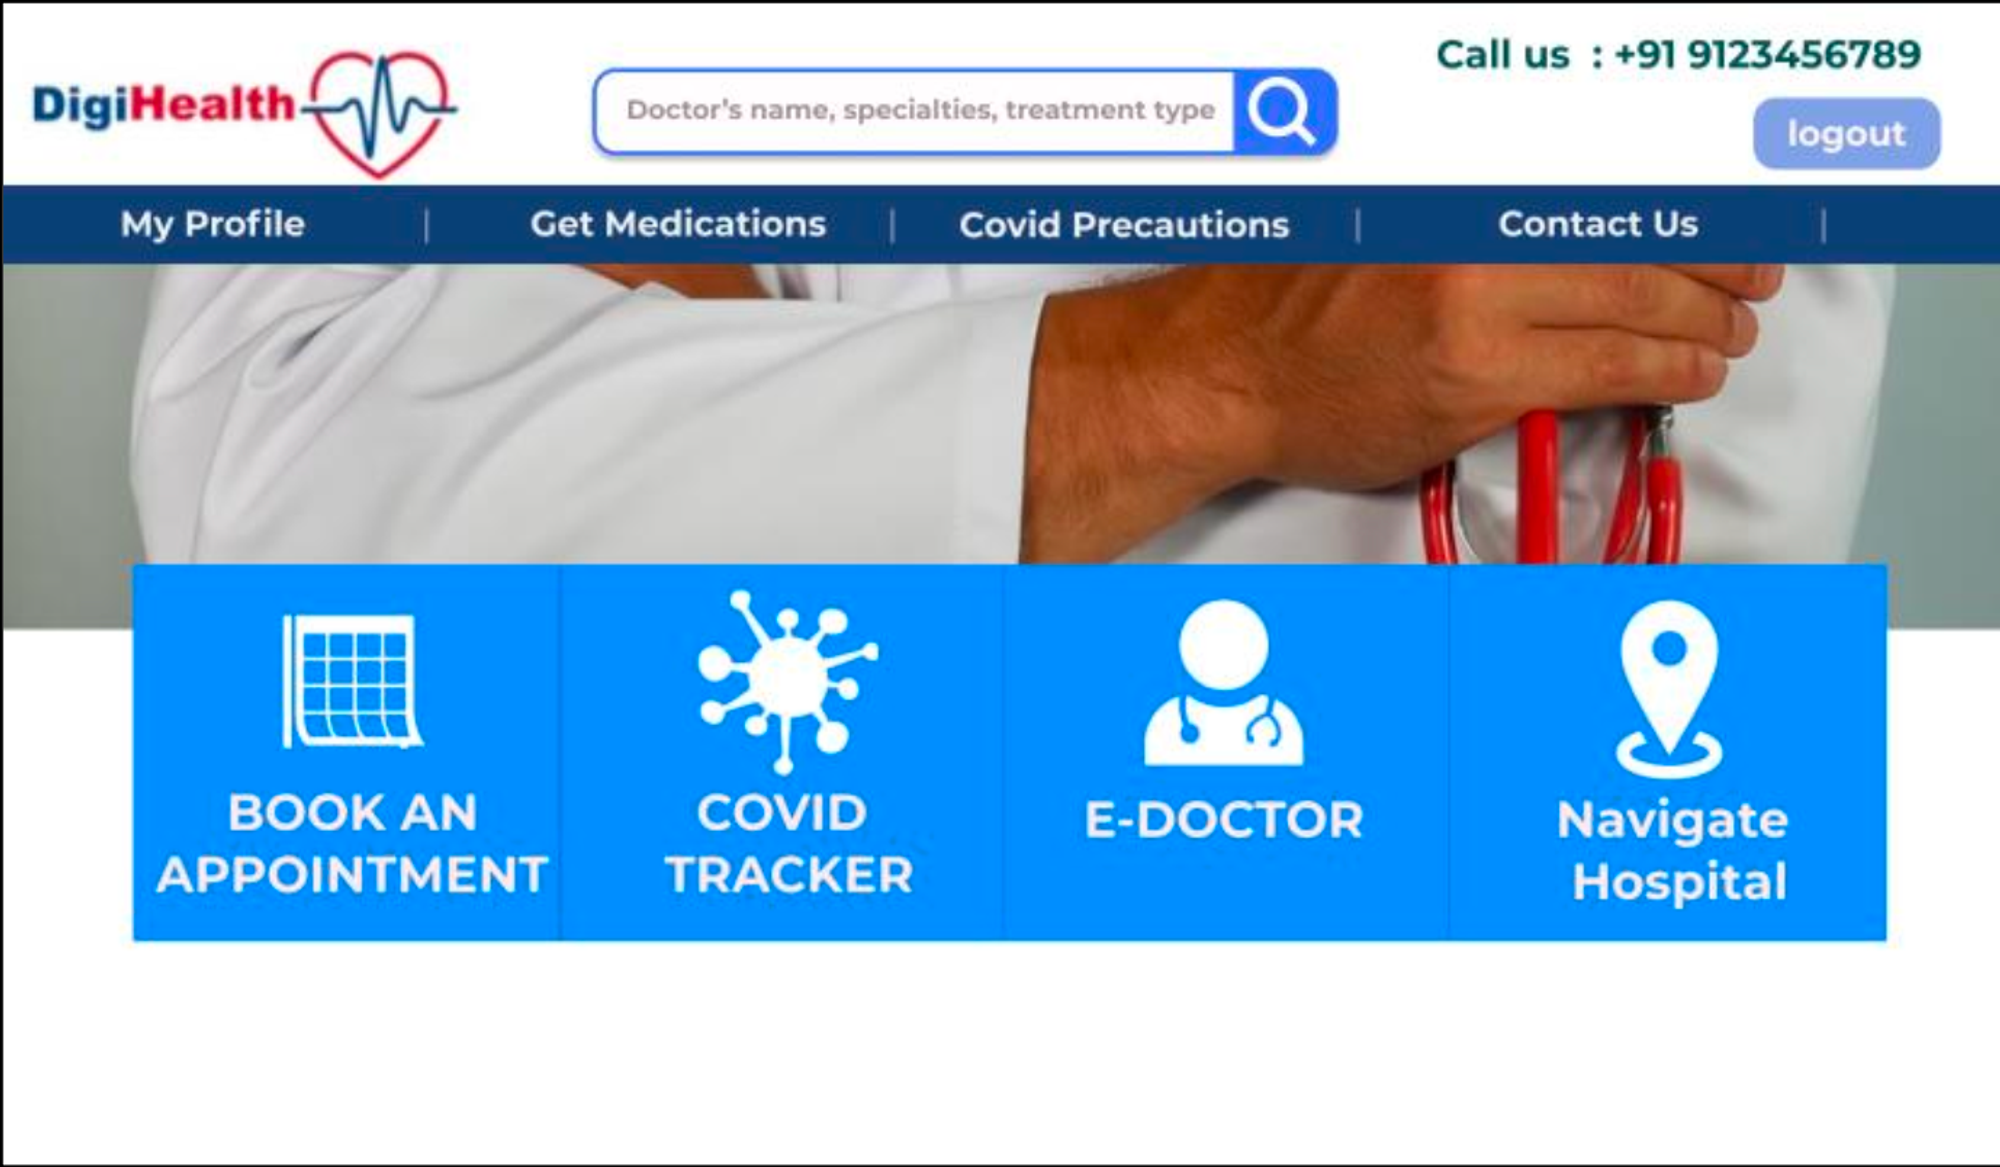 An image of the DIGIHEALTH project.